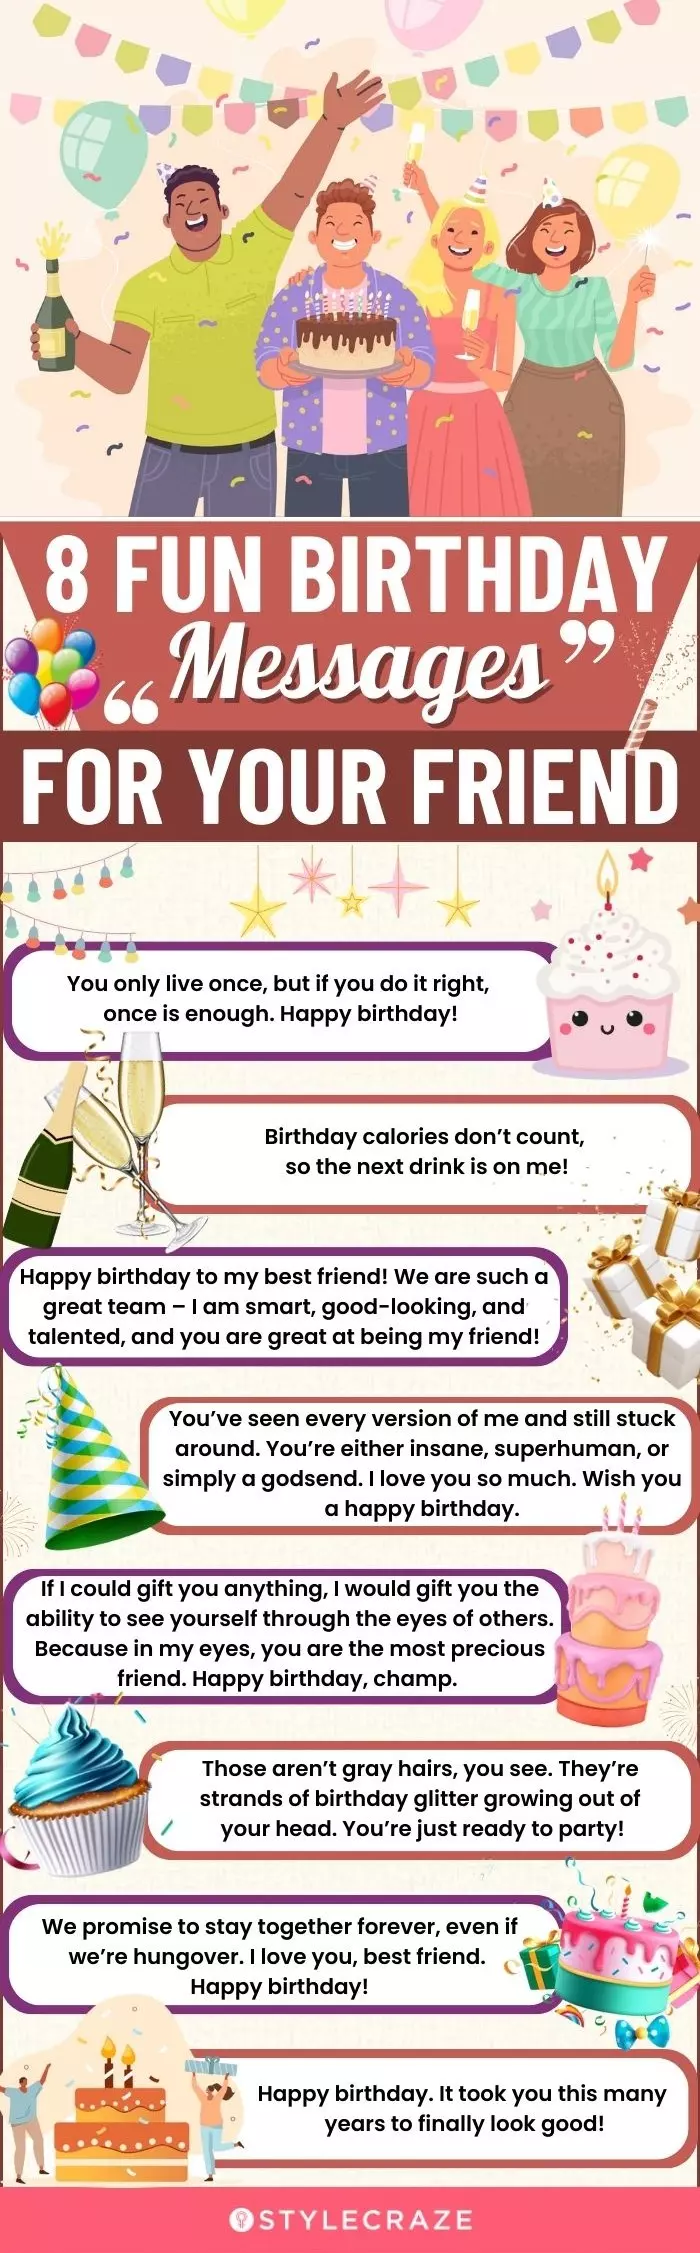 8 fun birthday messages for your friend (infographic)